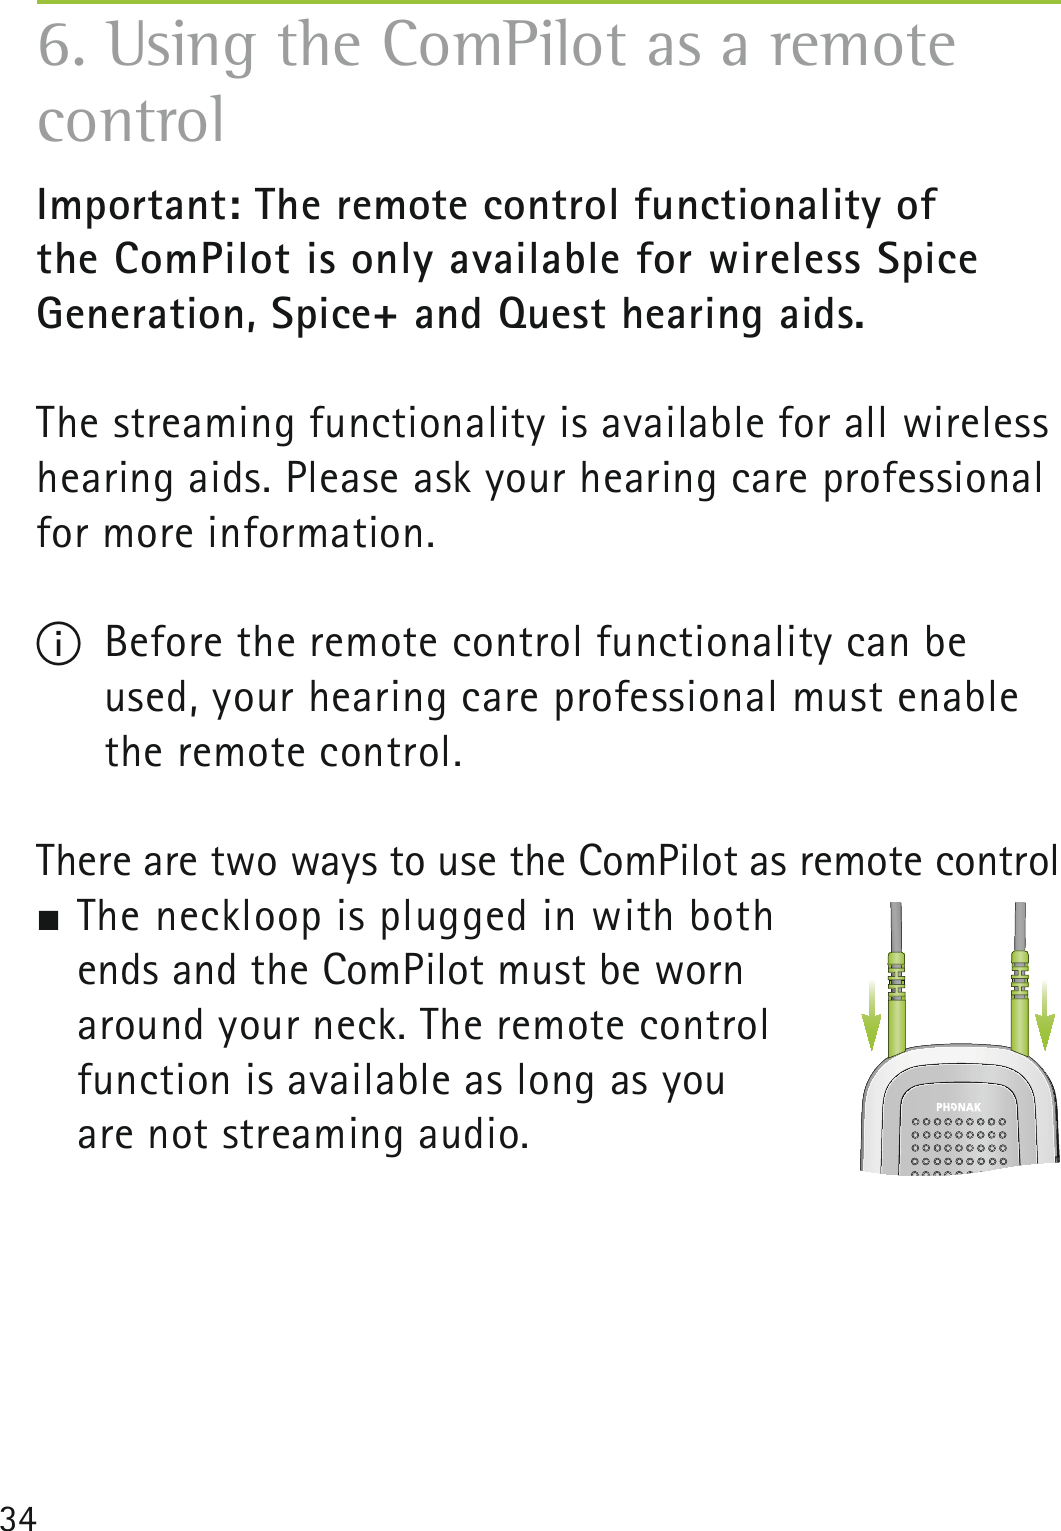 34Important: The remote control functionality of  the ComPilot is only available for wireless Spice  Generation, Spice+ and Quest hearing aids.The streaming functionality is available for all wireless hearing aids. Please ask your hearing care professional for more information.I  Before the remote control functionality can be used, your hearing care professional must enable the remote control. There are two ways to use the ComPilot as remote control The neckloop is plugged in with both  ends and the ComPilot must be worn  around your neck. The remote control  function is available as long as you  are not streaming audio.6. Using the ComPilot as a remote control